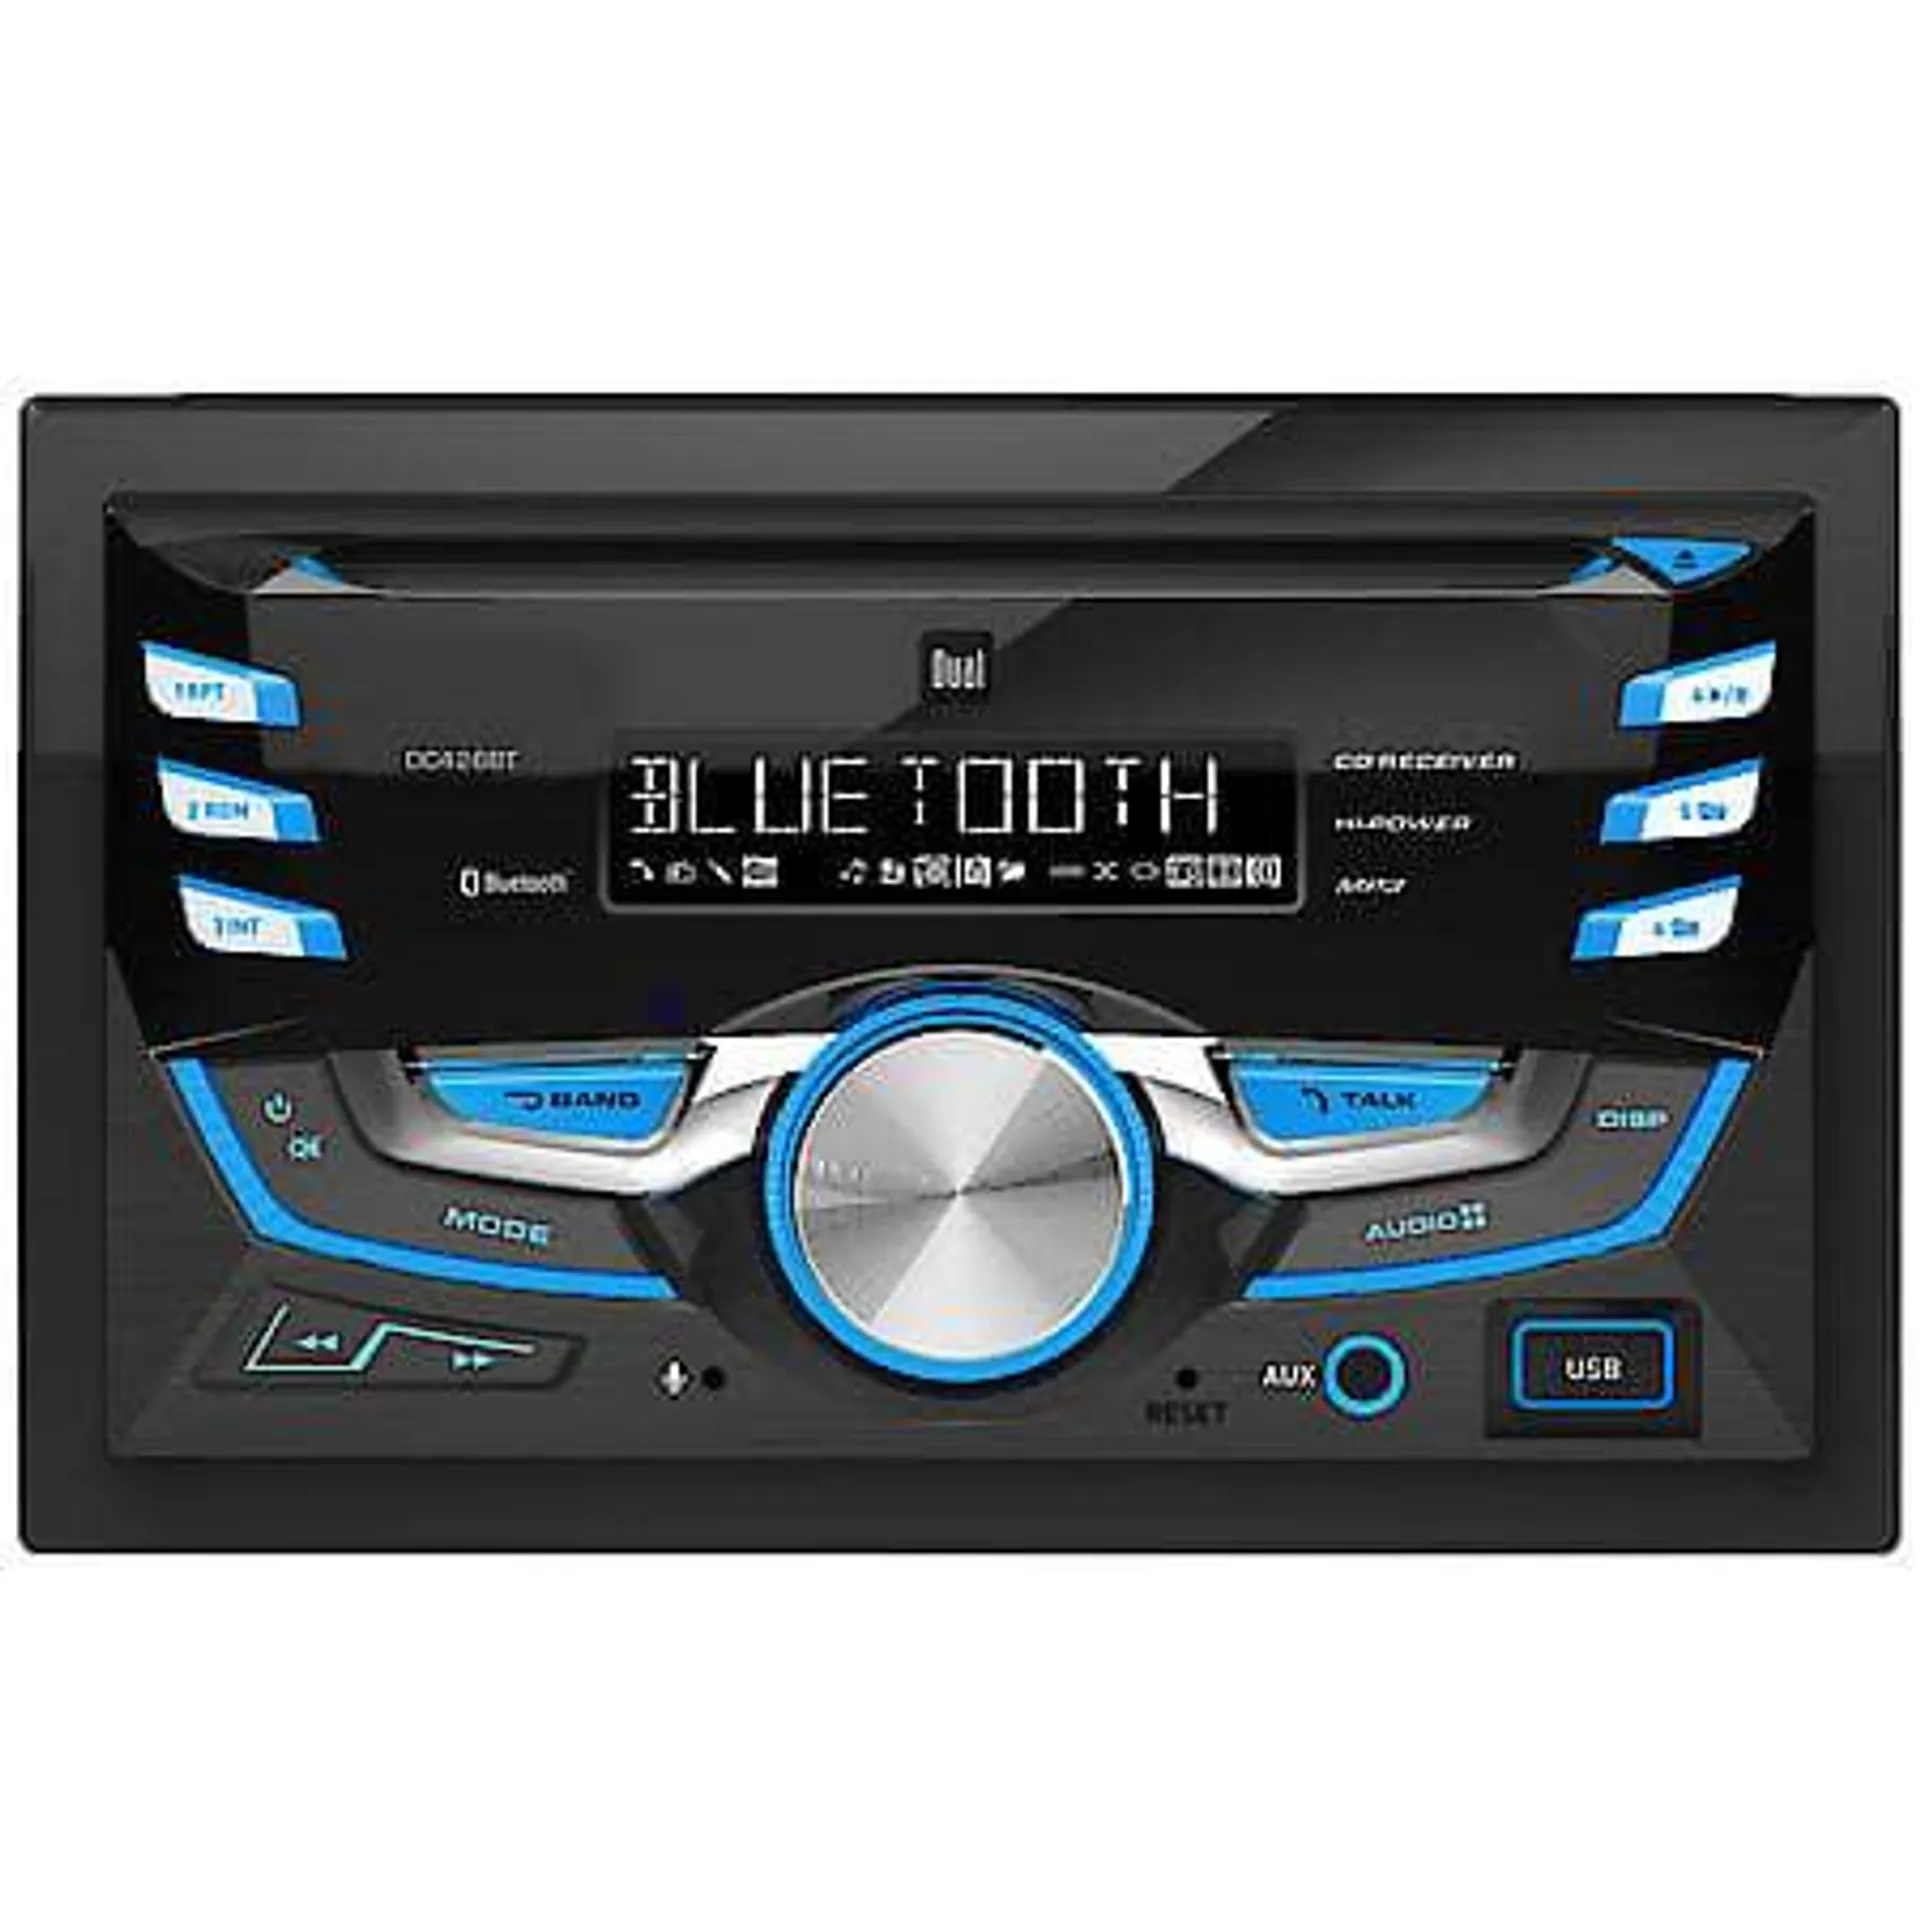 Double Din Car Stereo: CD Player, Bluetooth, Hands Free Calling, High-Power Sound